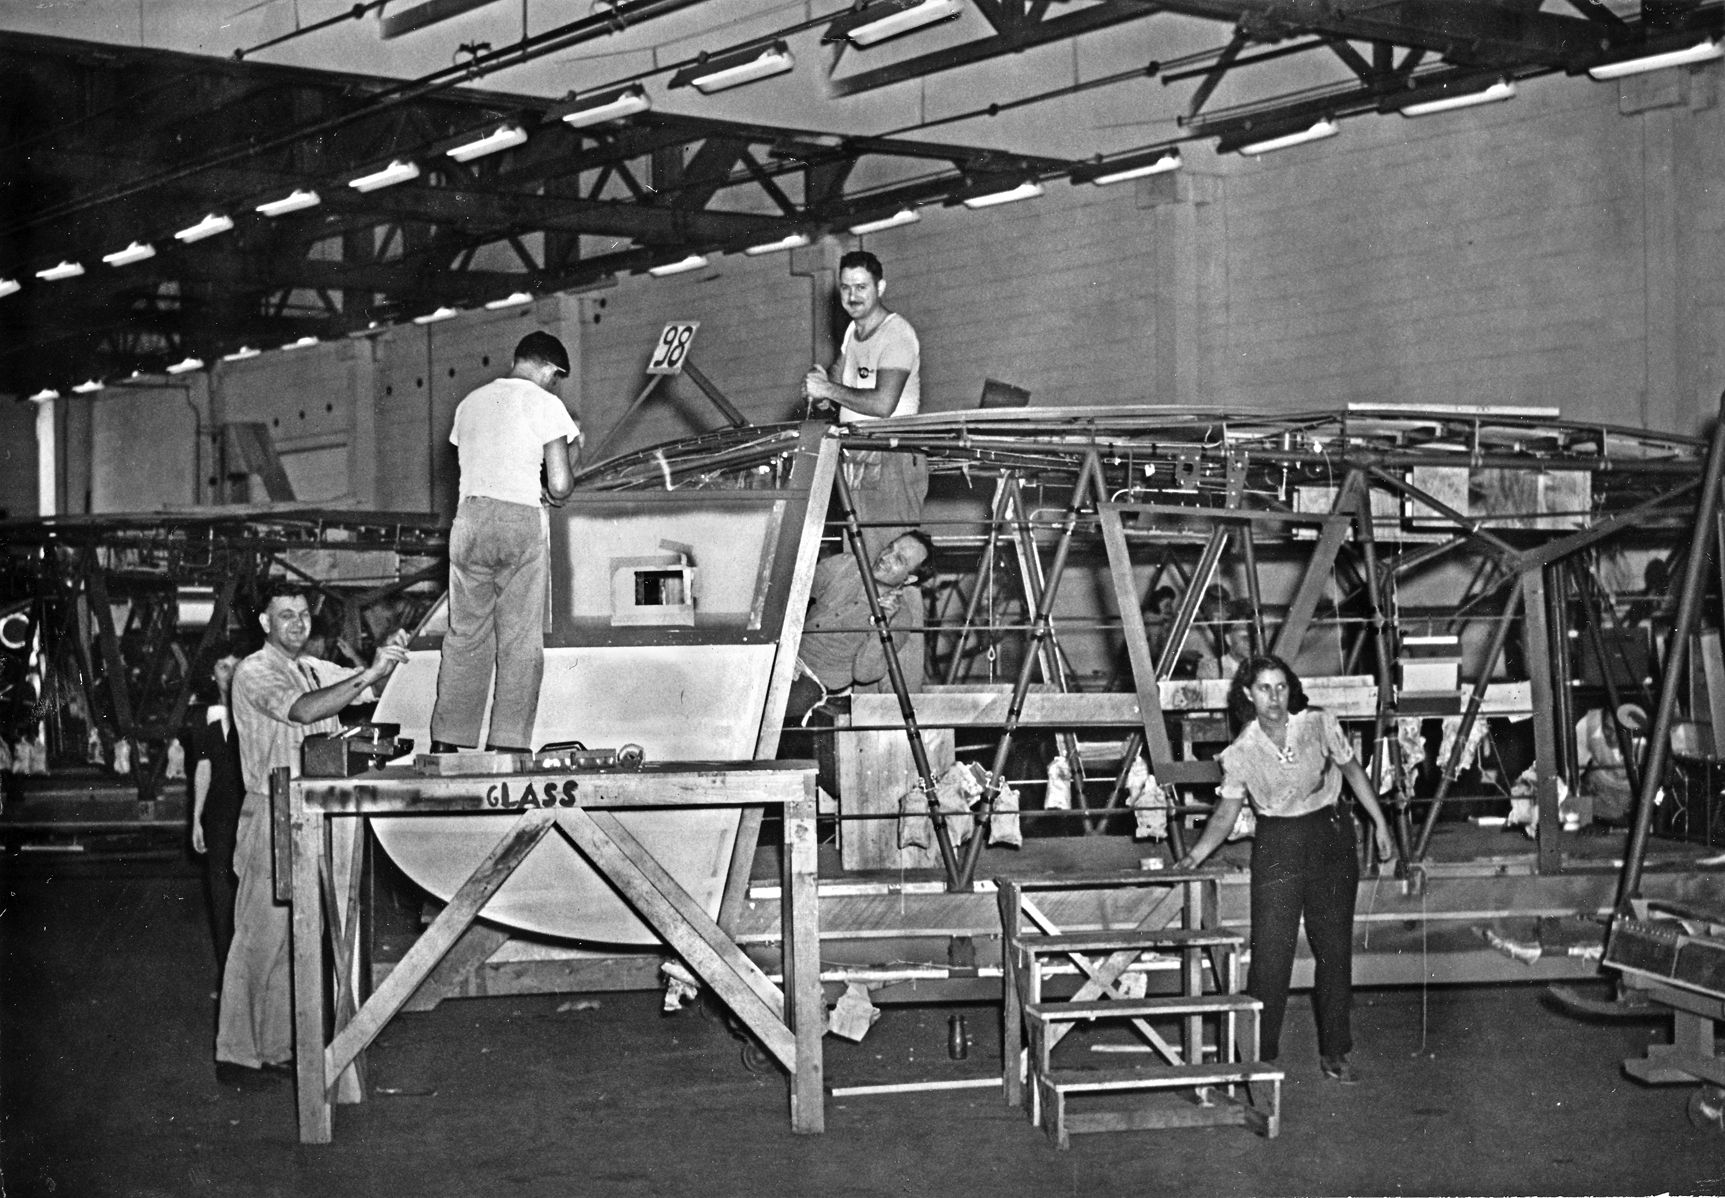 Pratt, Read employees perform primary assembly work on a Waco CG-4A glider. With over 70,000 parts, the CG-4A proved almost impossible for manufacturers with little or no aircraft-making experience to build.